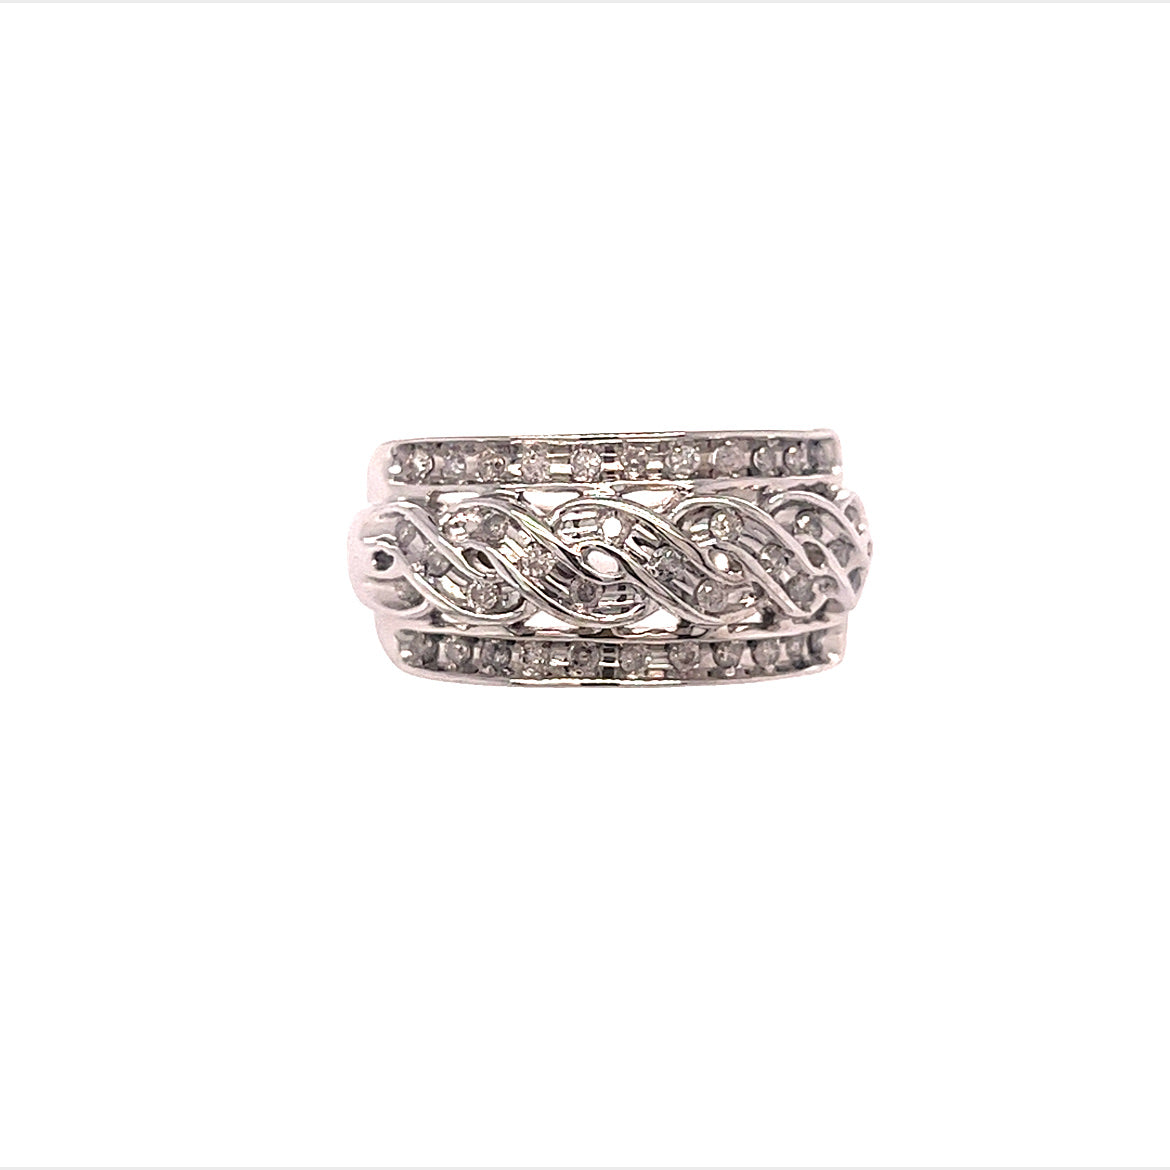 14KT WHITE GOLD BRAIDED STYLE WITH DIAMOND LADIES RING